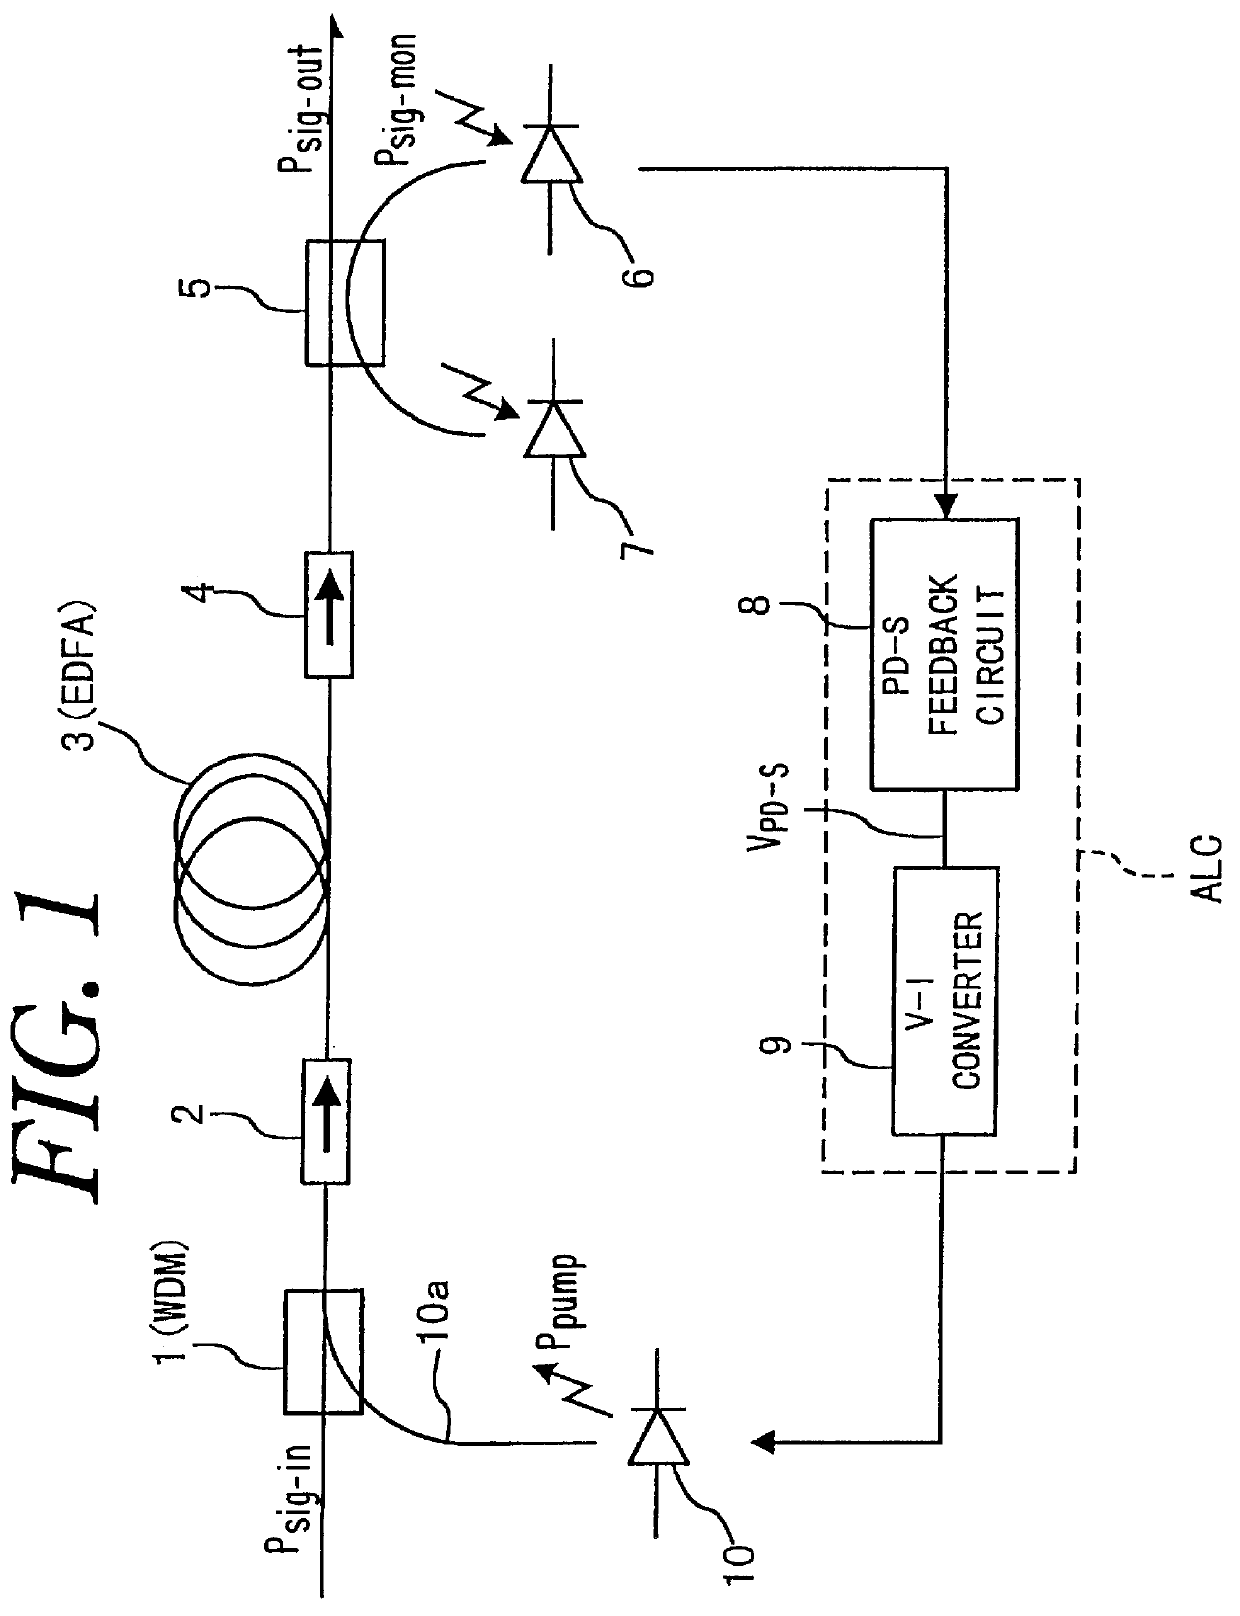 Apparatus for controlling laser diode